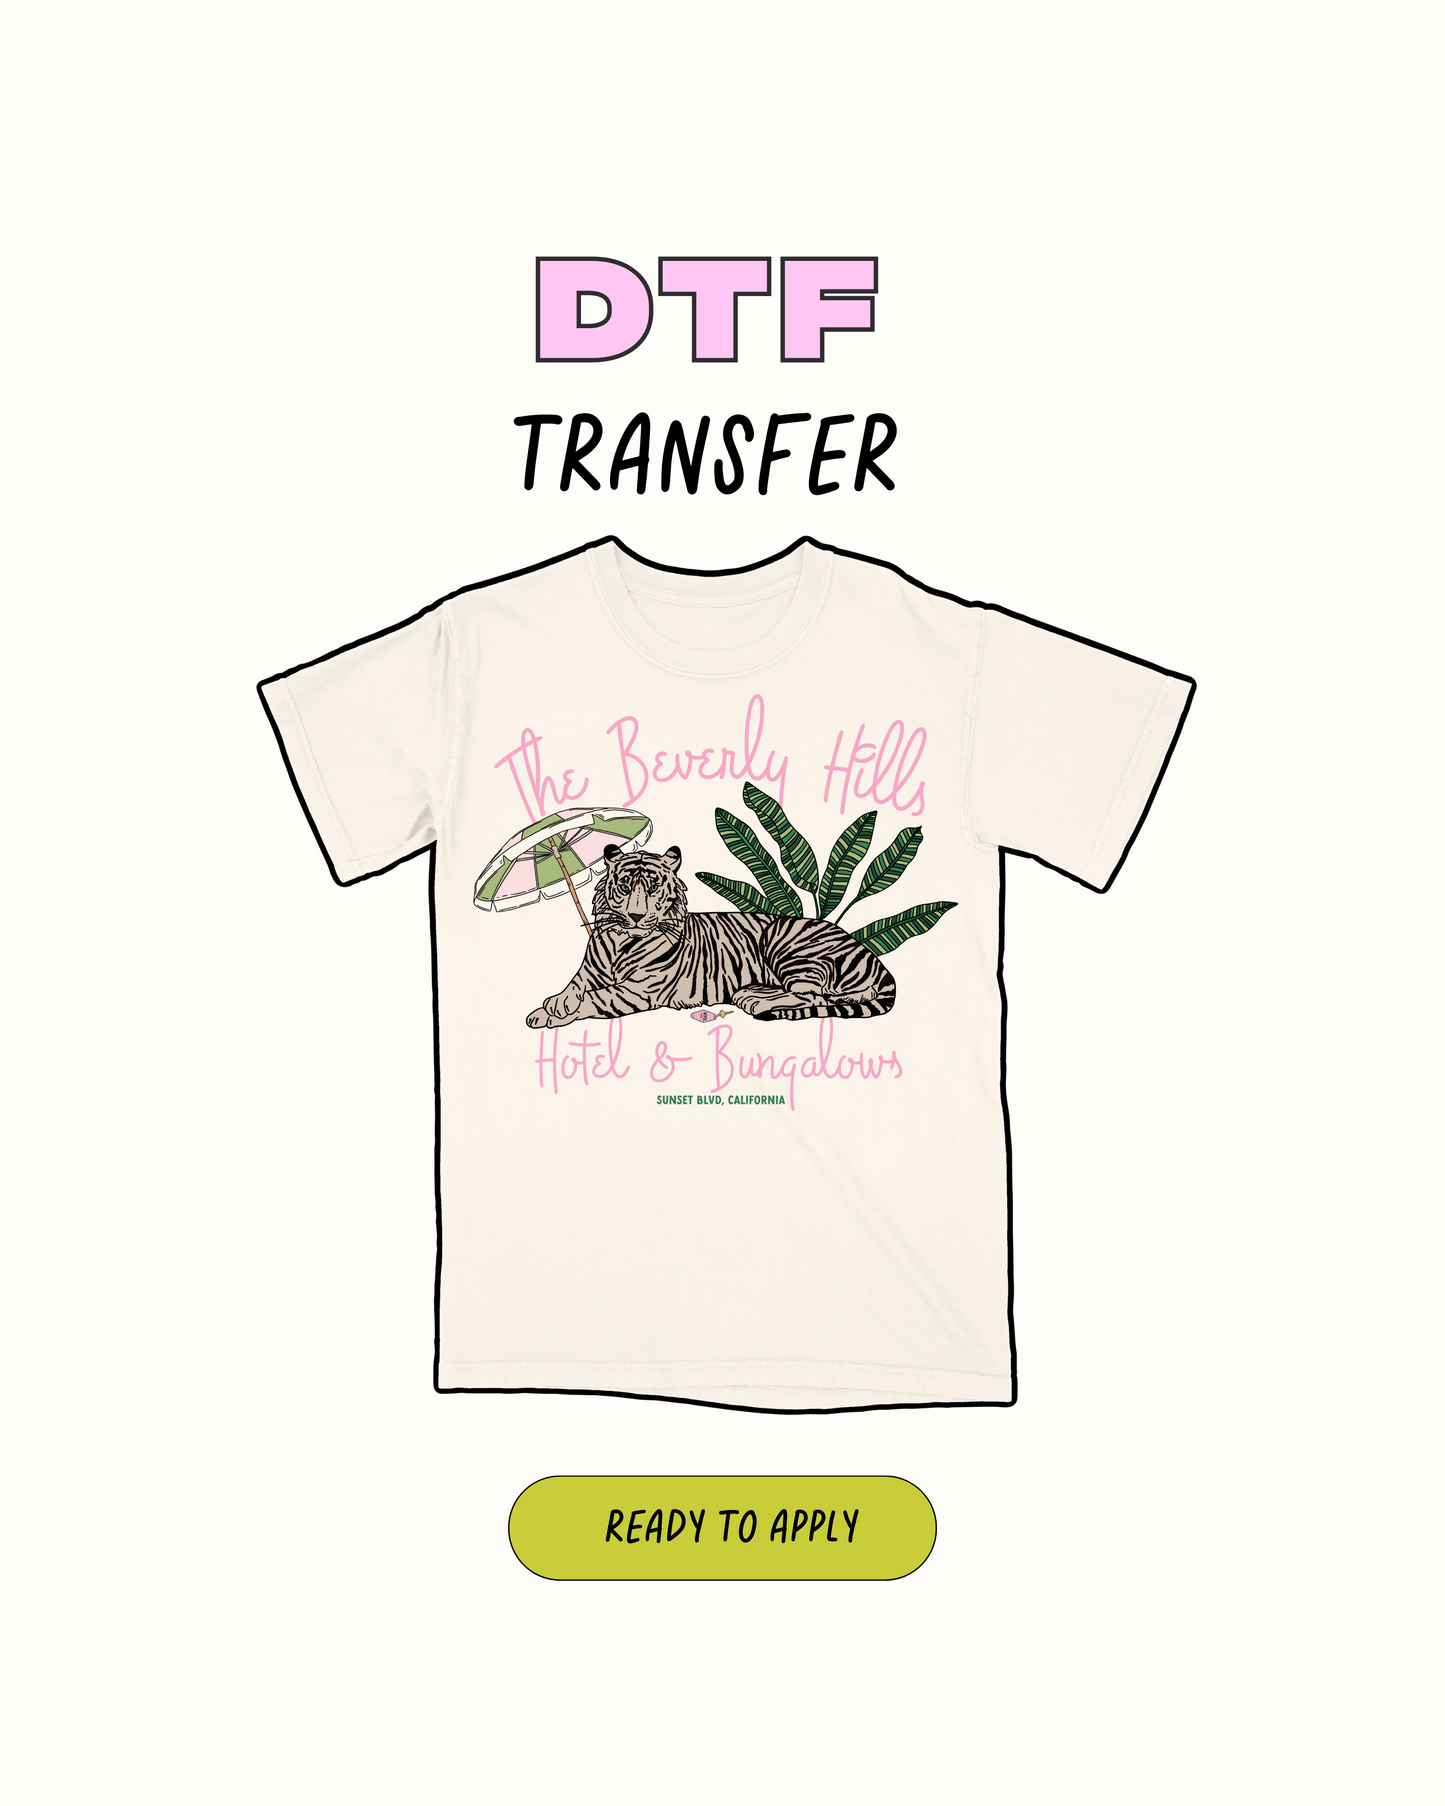 Beverly Hills - Transferencia DTF